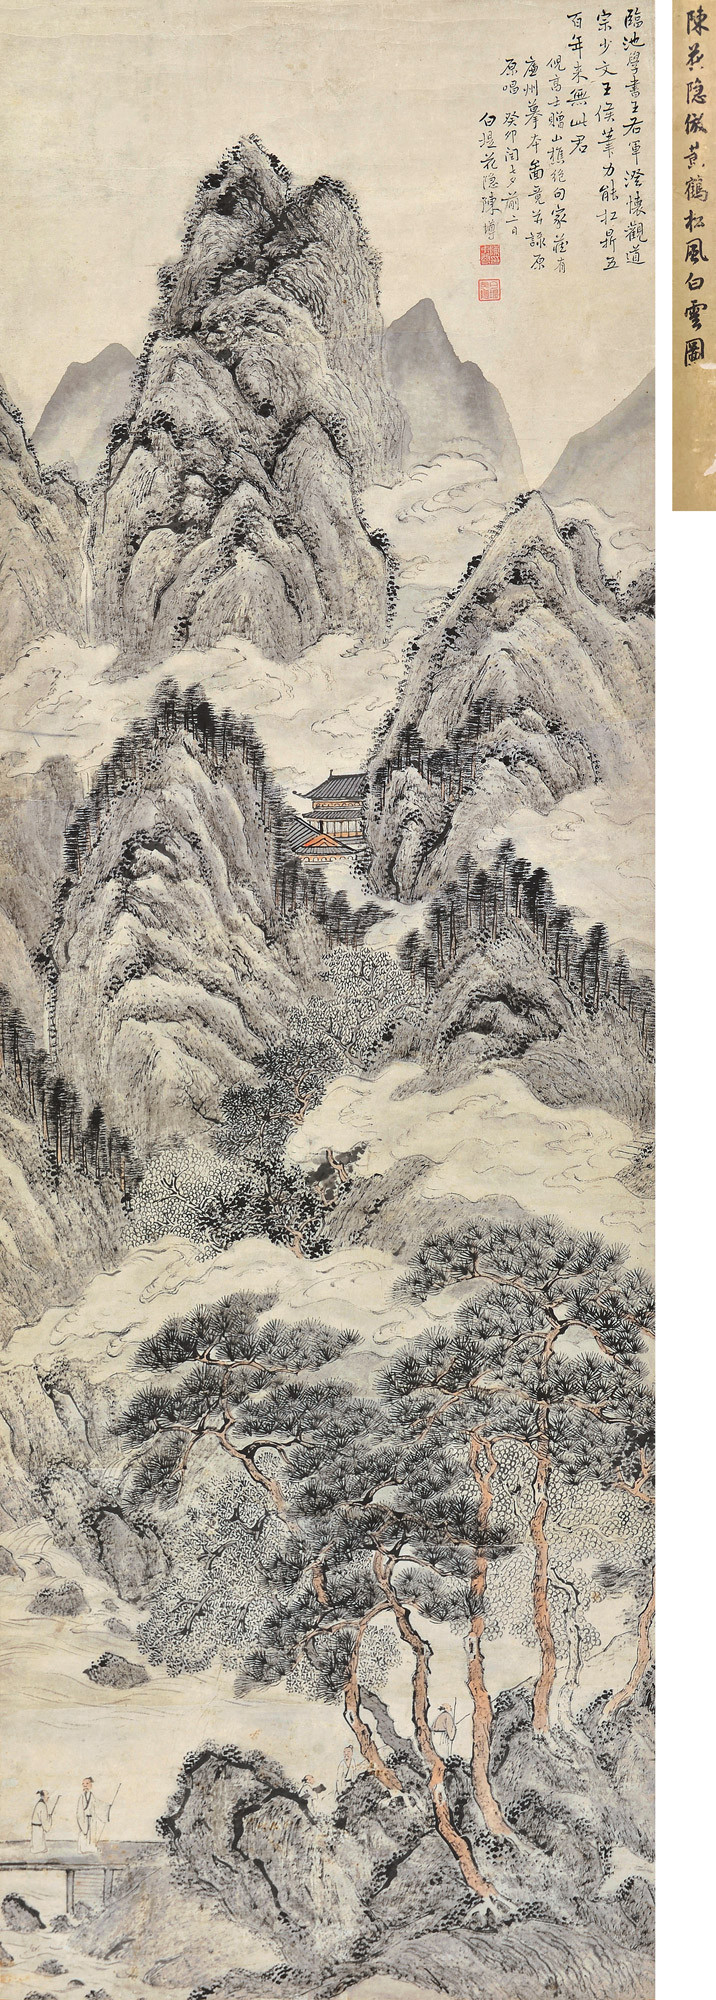 LANDSCAPE IN THE STYLE OF WANGMENG